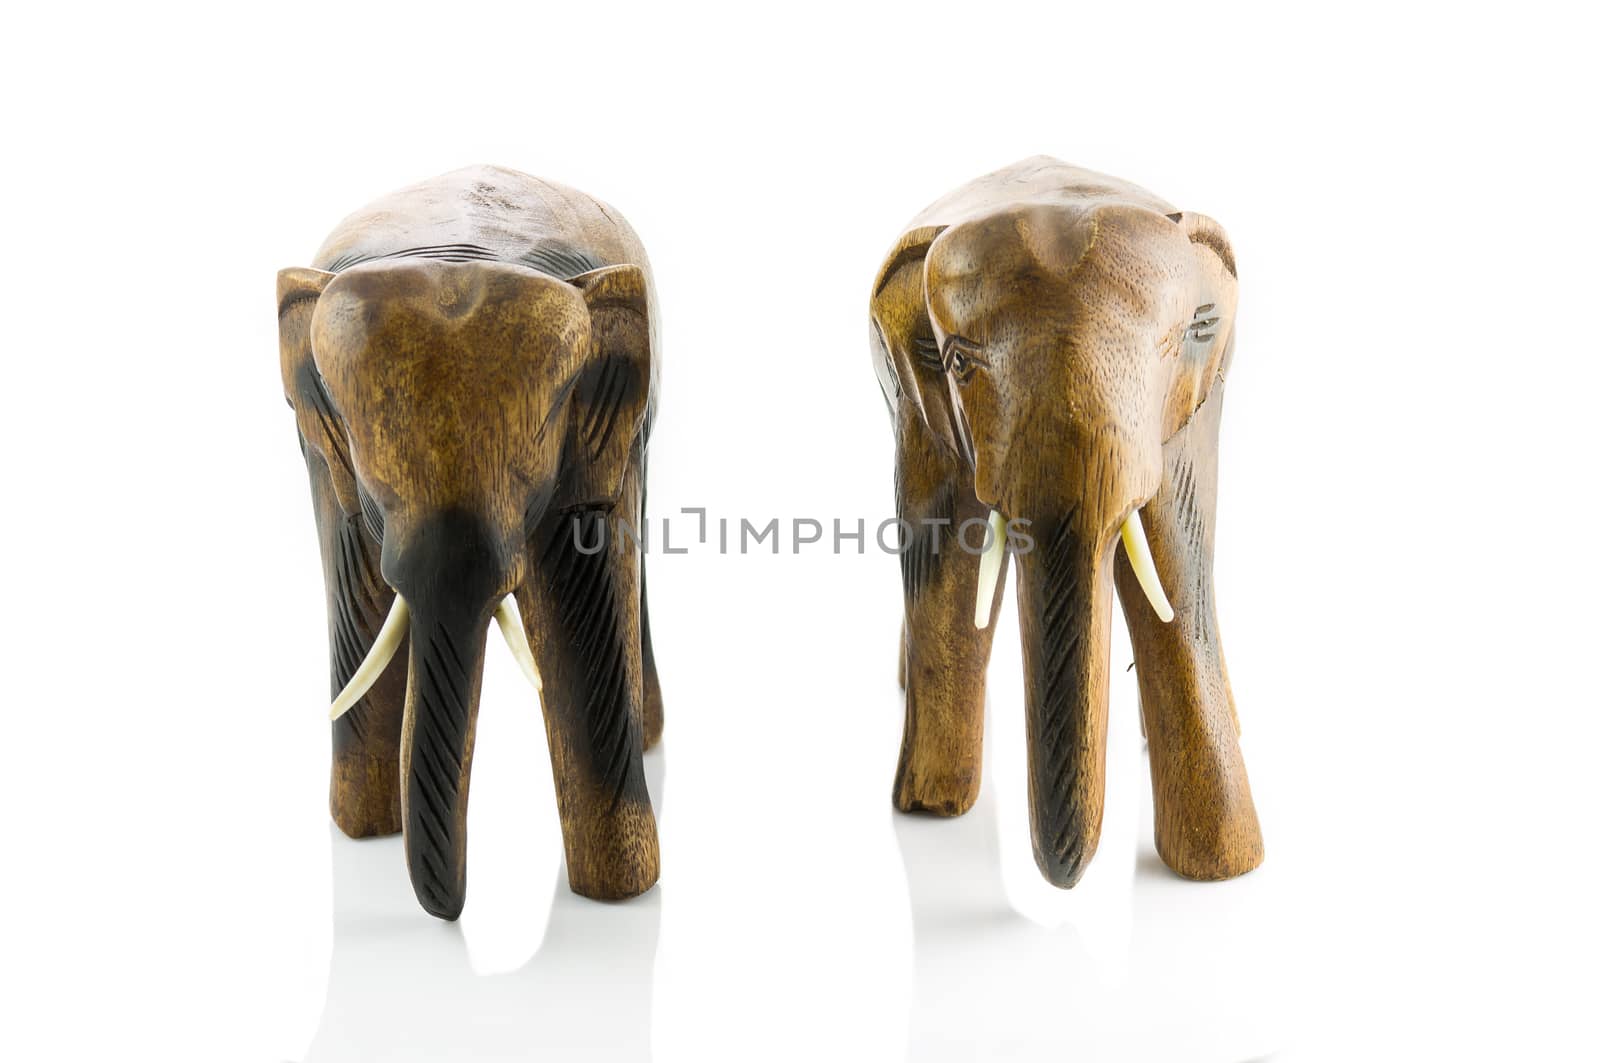 Handcraft wood elephant sculpture. Isolate on white background.